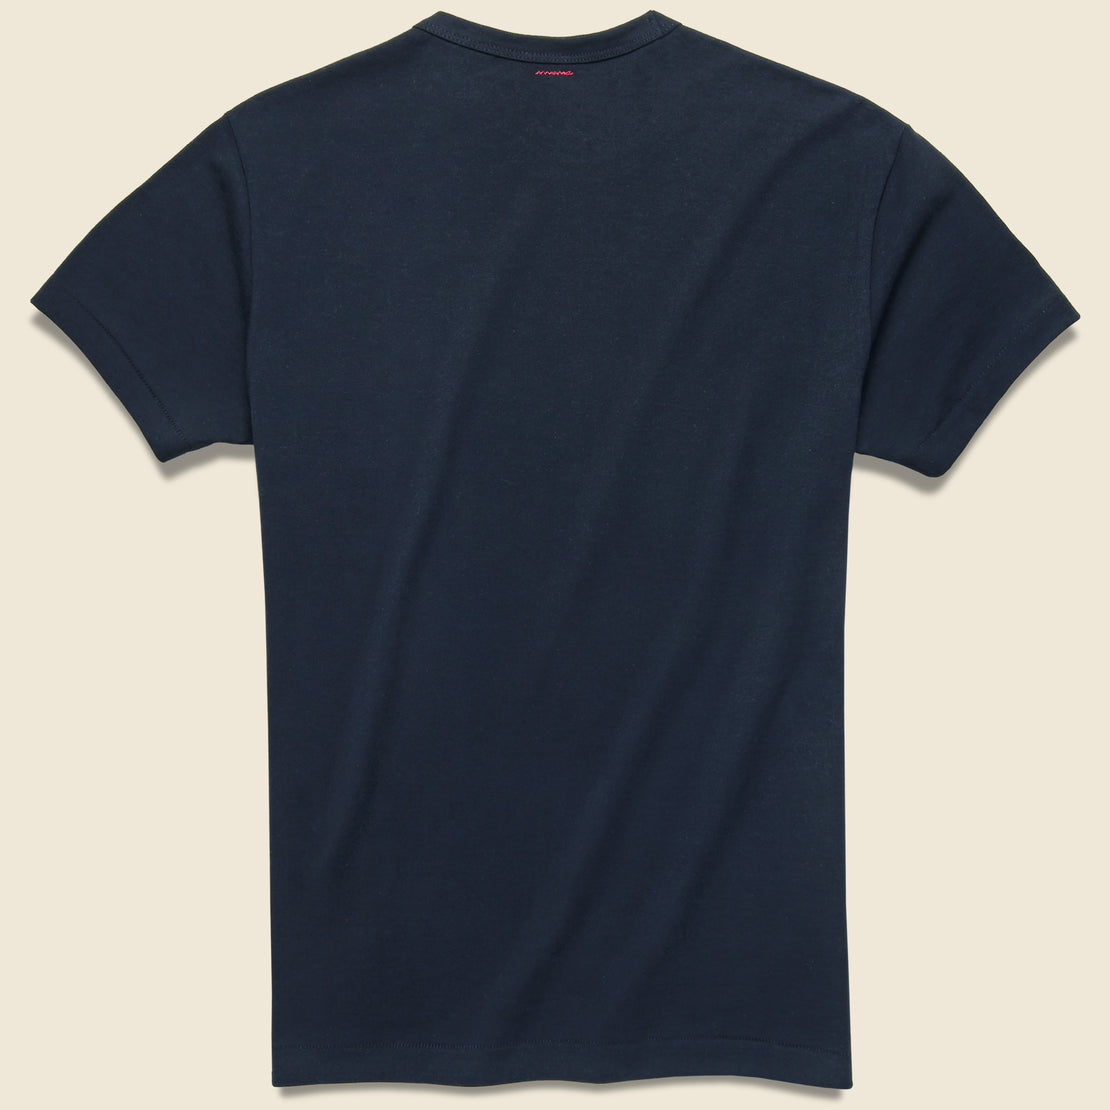 Todd Snyder + Champion - Stacked Champion Tee - Original Navy - Todd Snyder - STAG Provisions - Tops - Graphic Tee